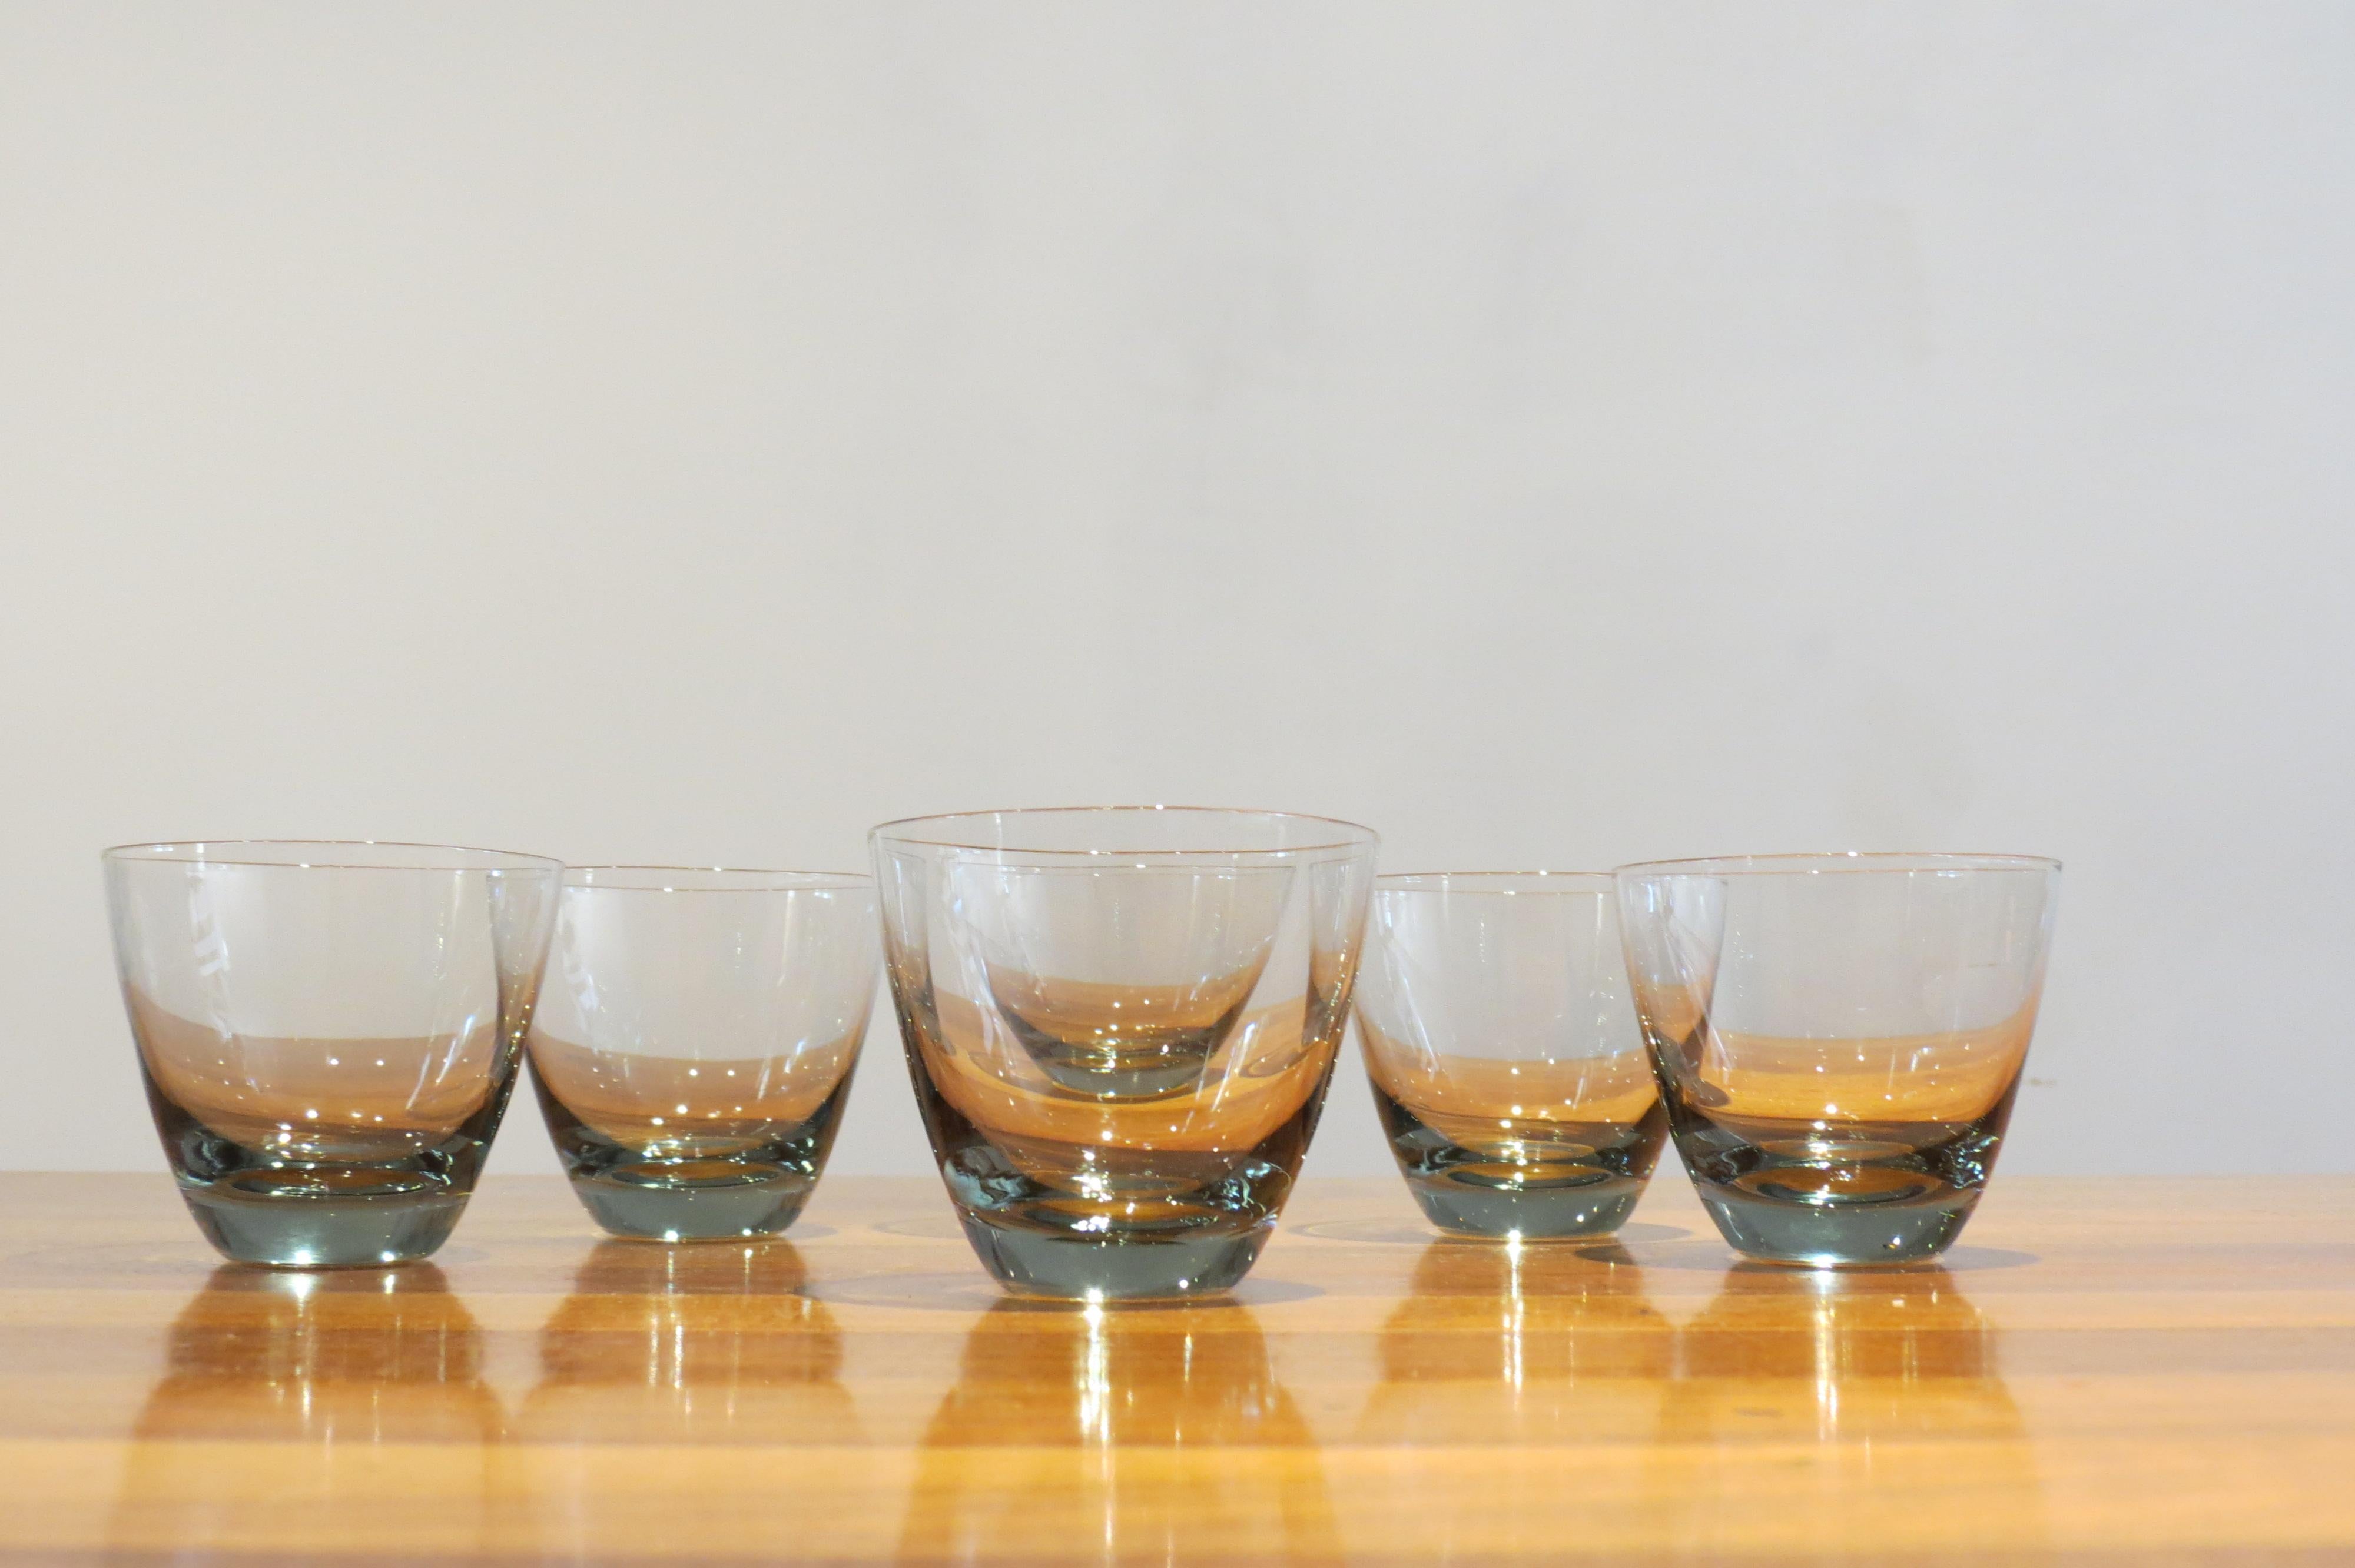 A set of six vintage Holmegaard glasses.
Designed by Per Lutken, model Copenhagen, 1950s.
Measures: 6cm tall, 7cm diameter widest point.
Smoked glass.
Good condition, two glasses have a blemish on the side of the glass, this probably appeared